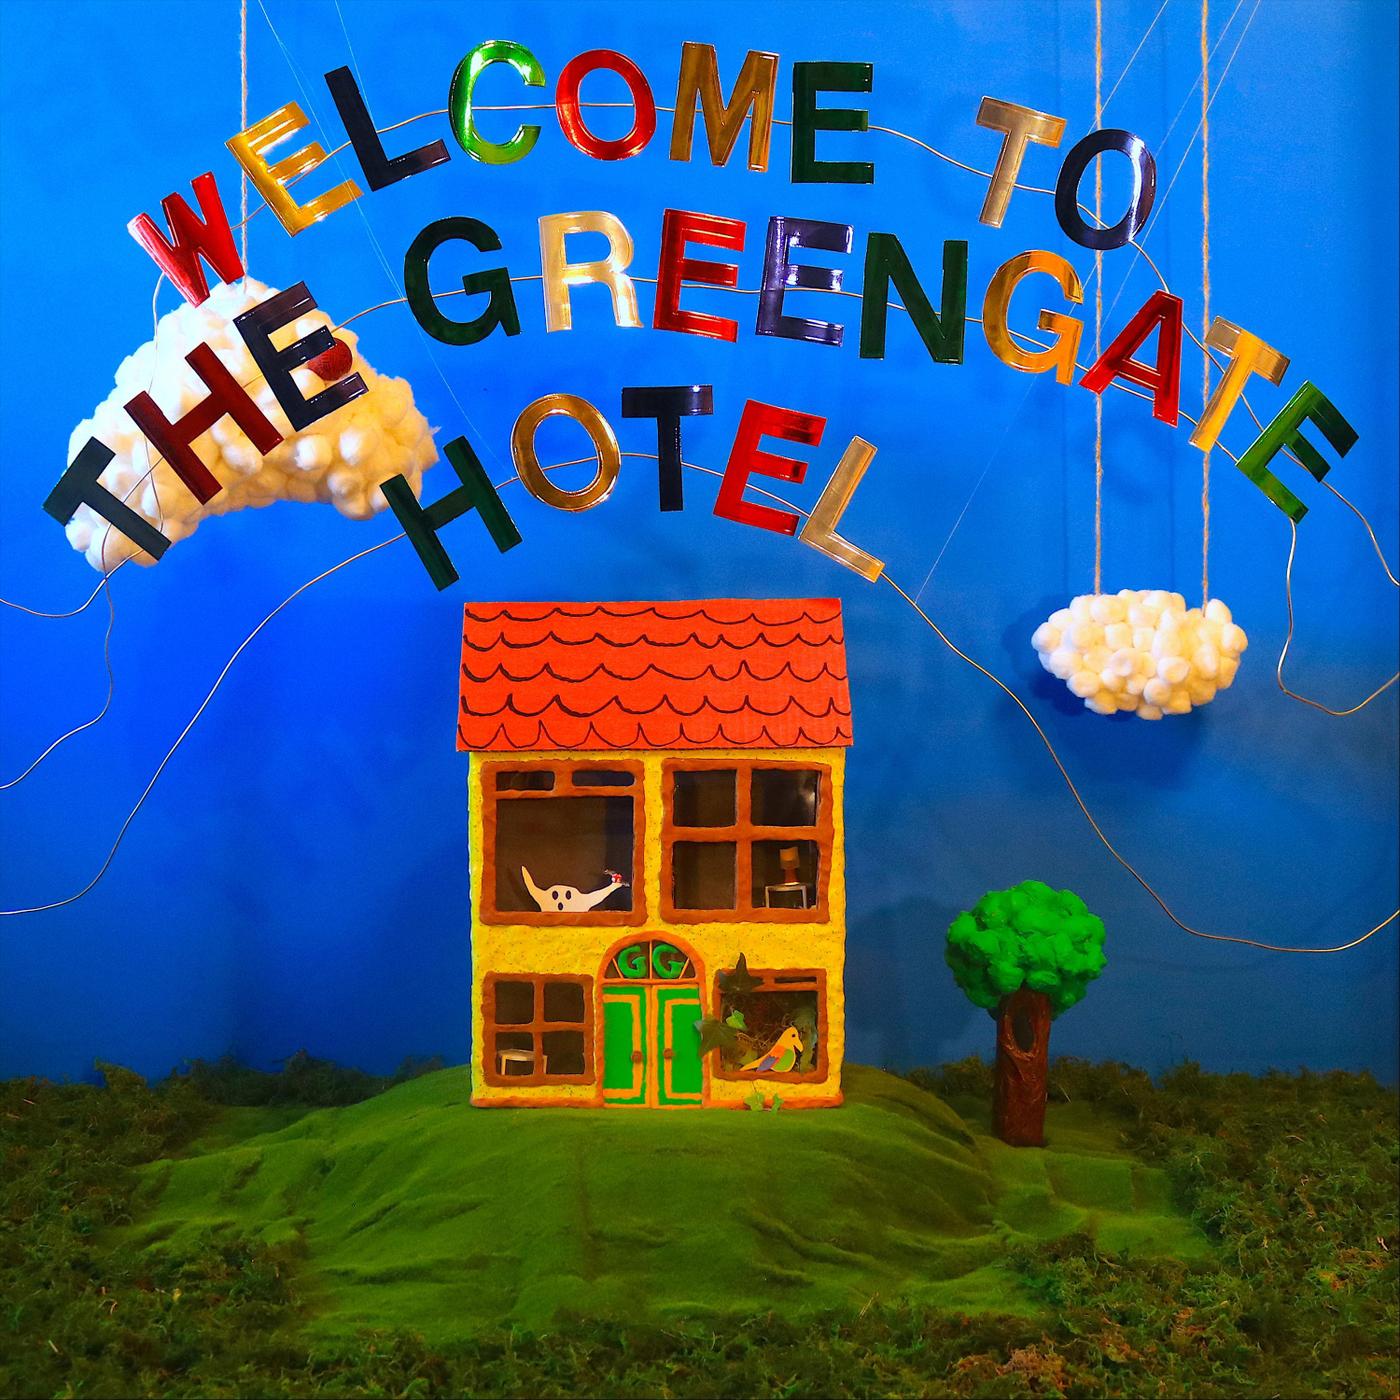 Welcome to the Greengate Hotel